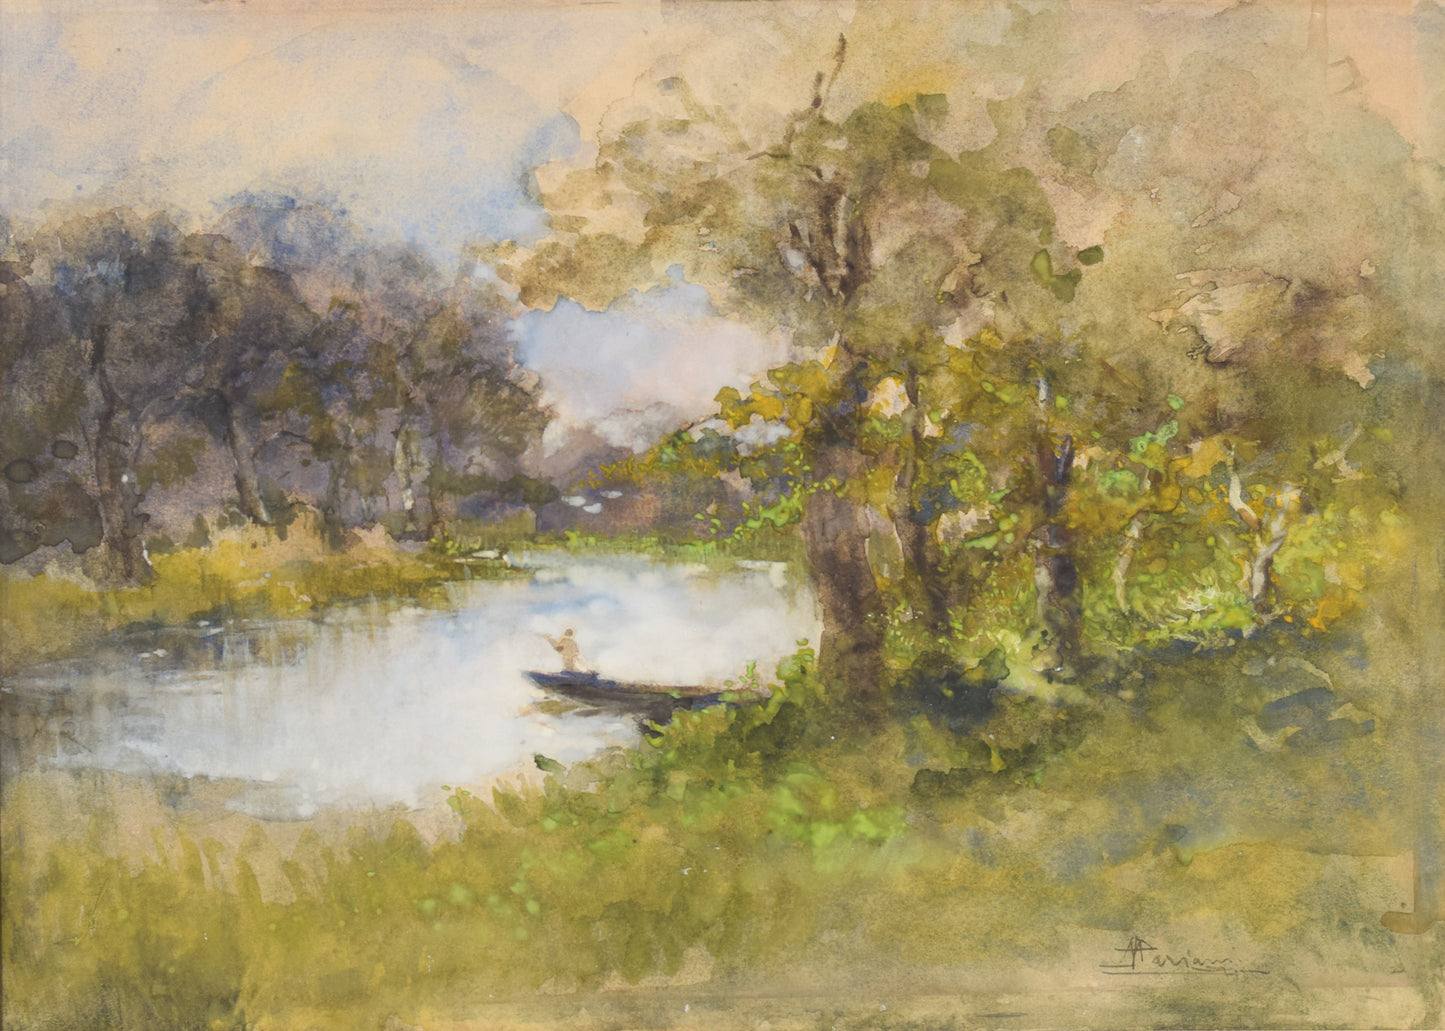 'The Boat on the River' Watercolour Landscape by Pompeo Mariani